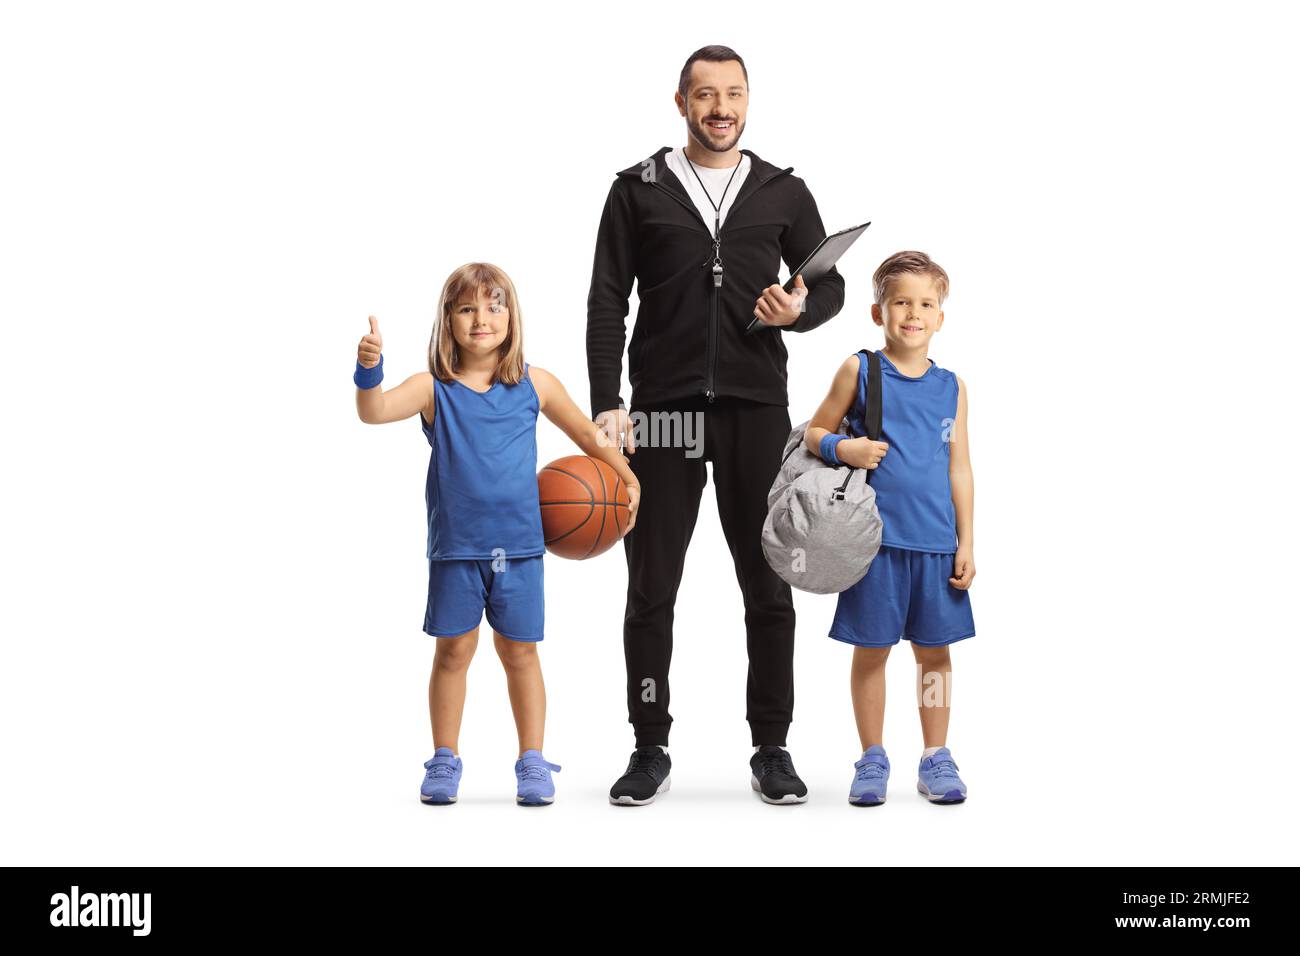 Basketball coach standing with a boy and girl in sport jerseys isolated on white background Stock Photo